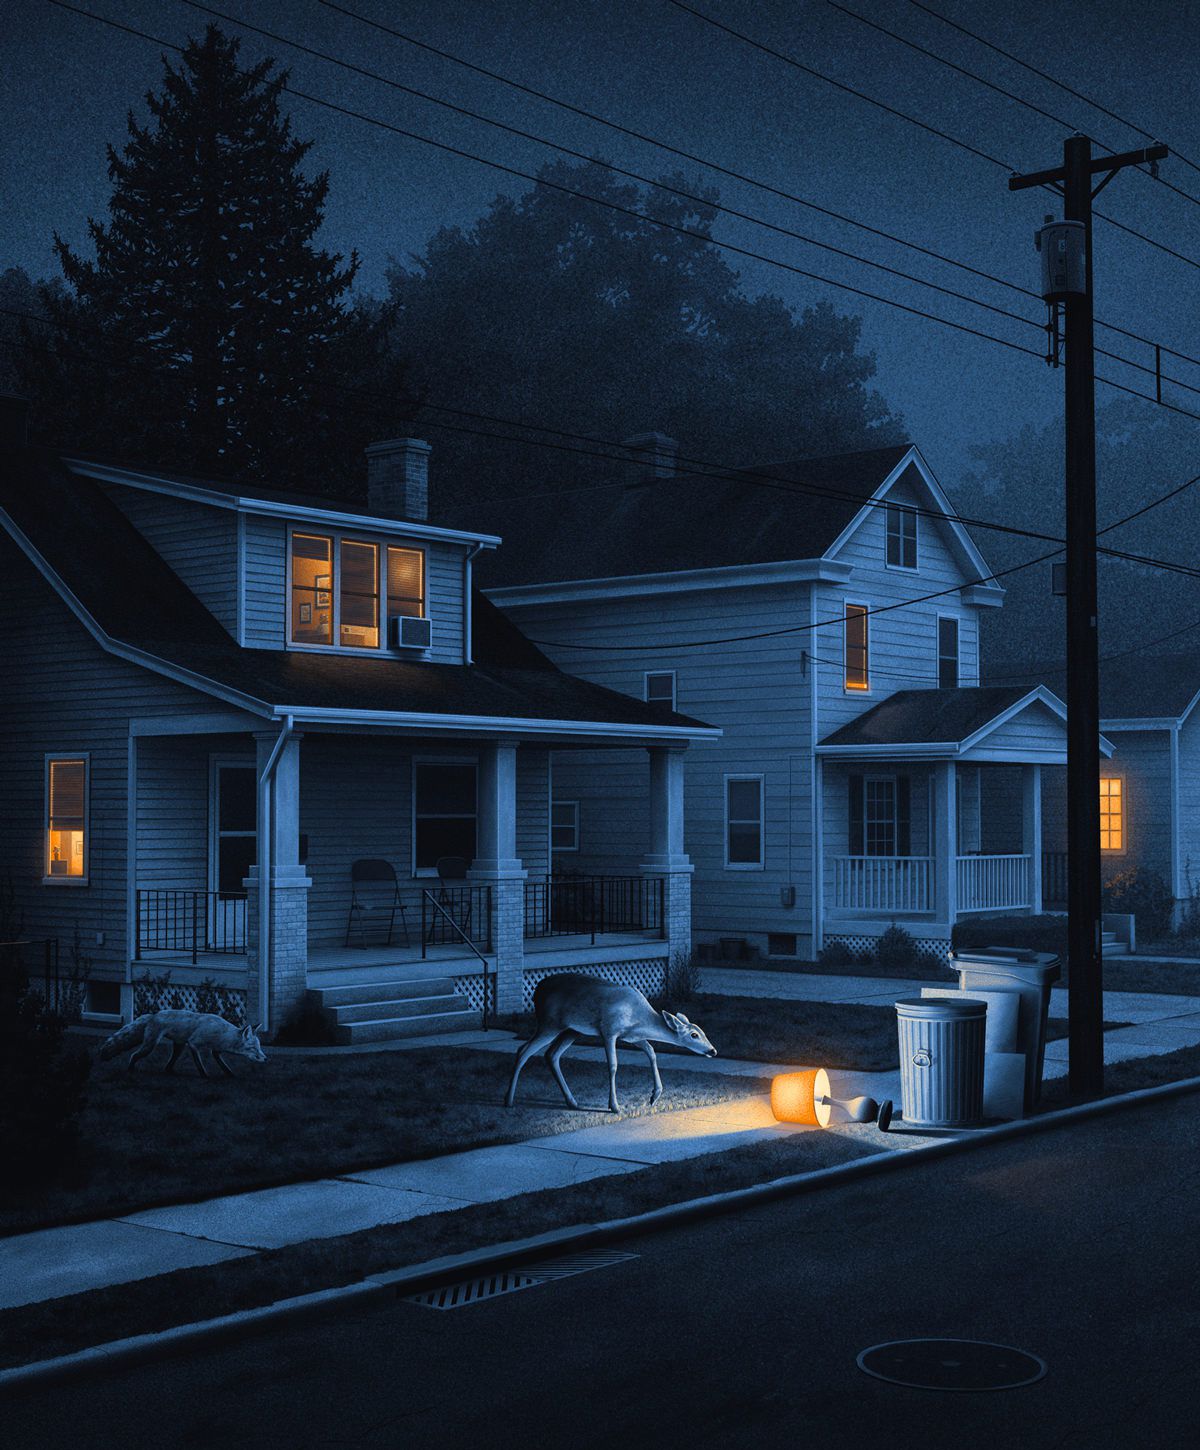 Nighttime Nostalgia Delightful Paintings By Nicholas Moegly 3